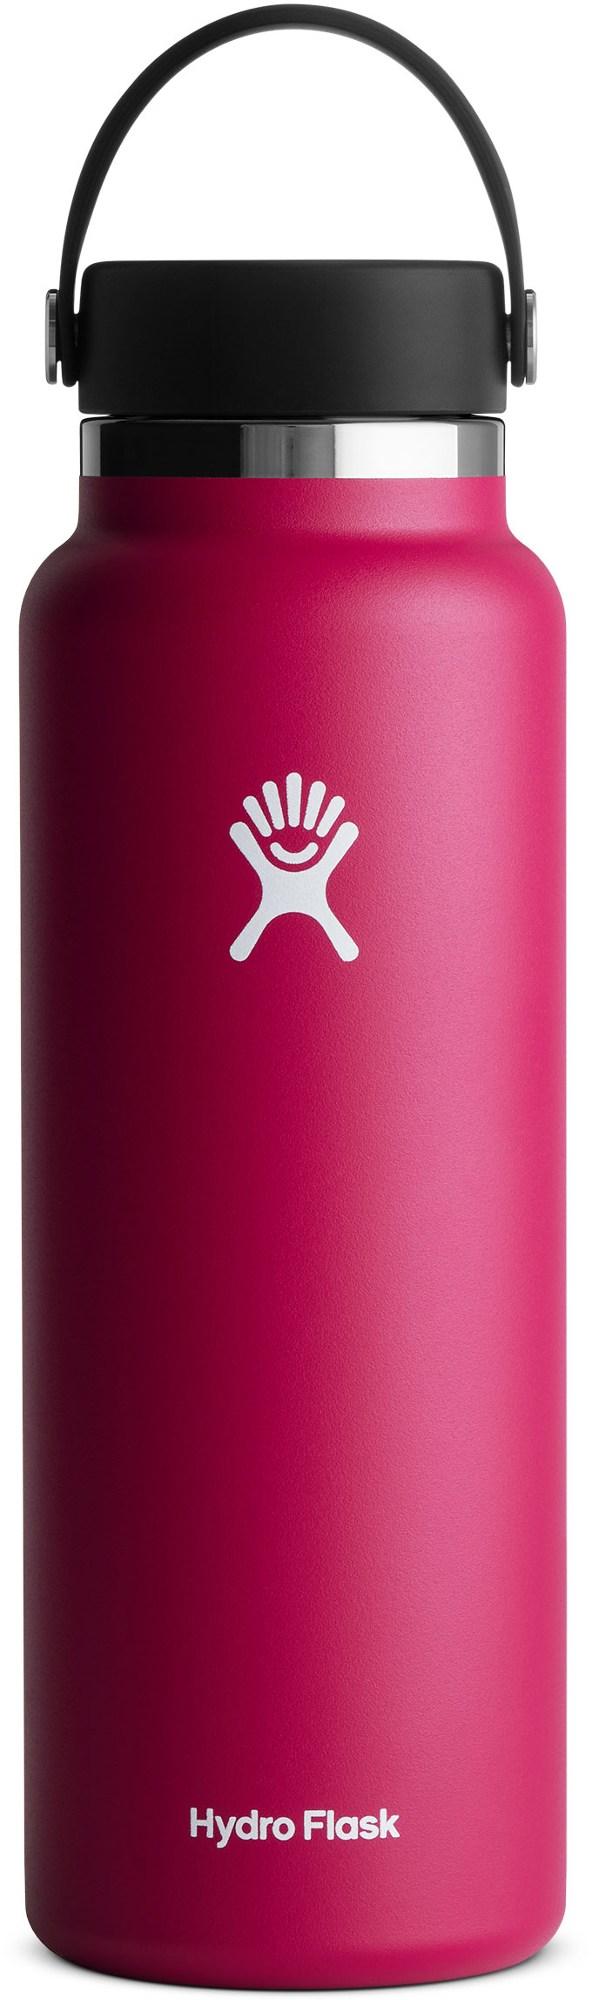 Hydro Flask 40 oz. Wide Mouth Bottle - Seagrass